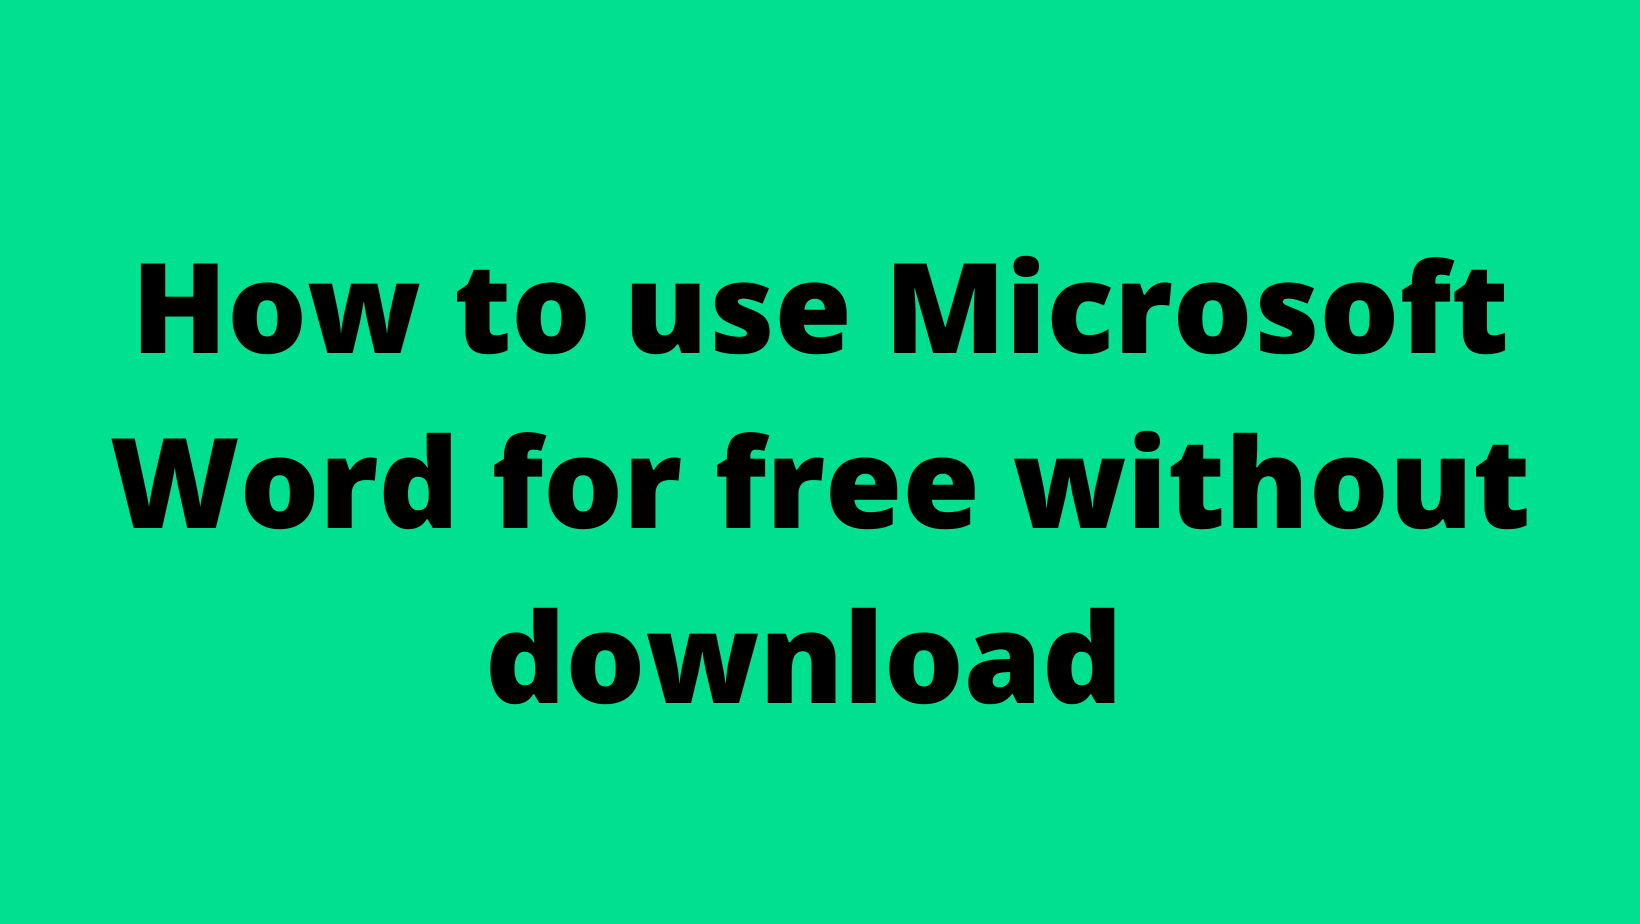 How to use Microsoft Word for free